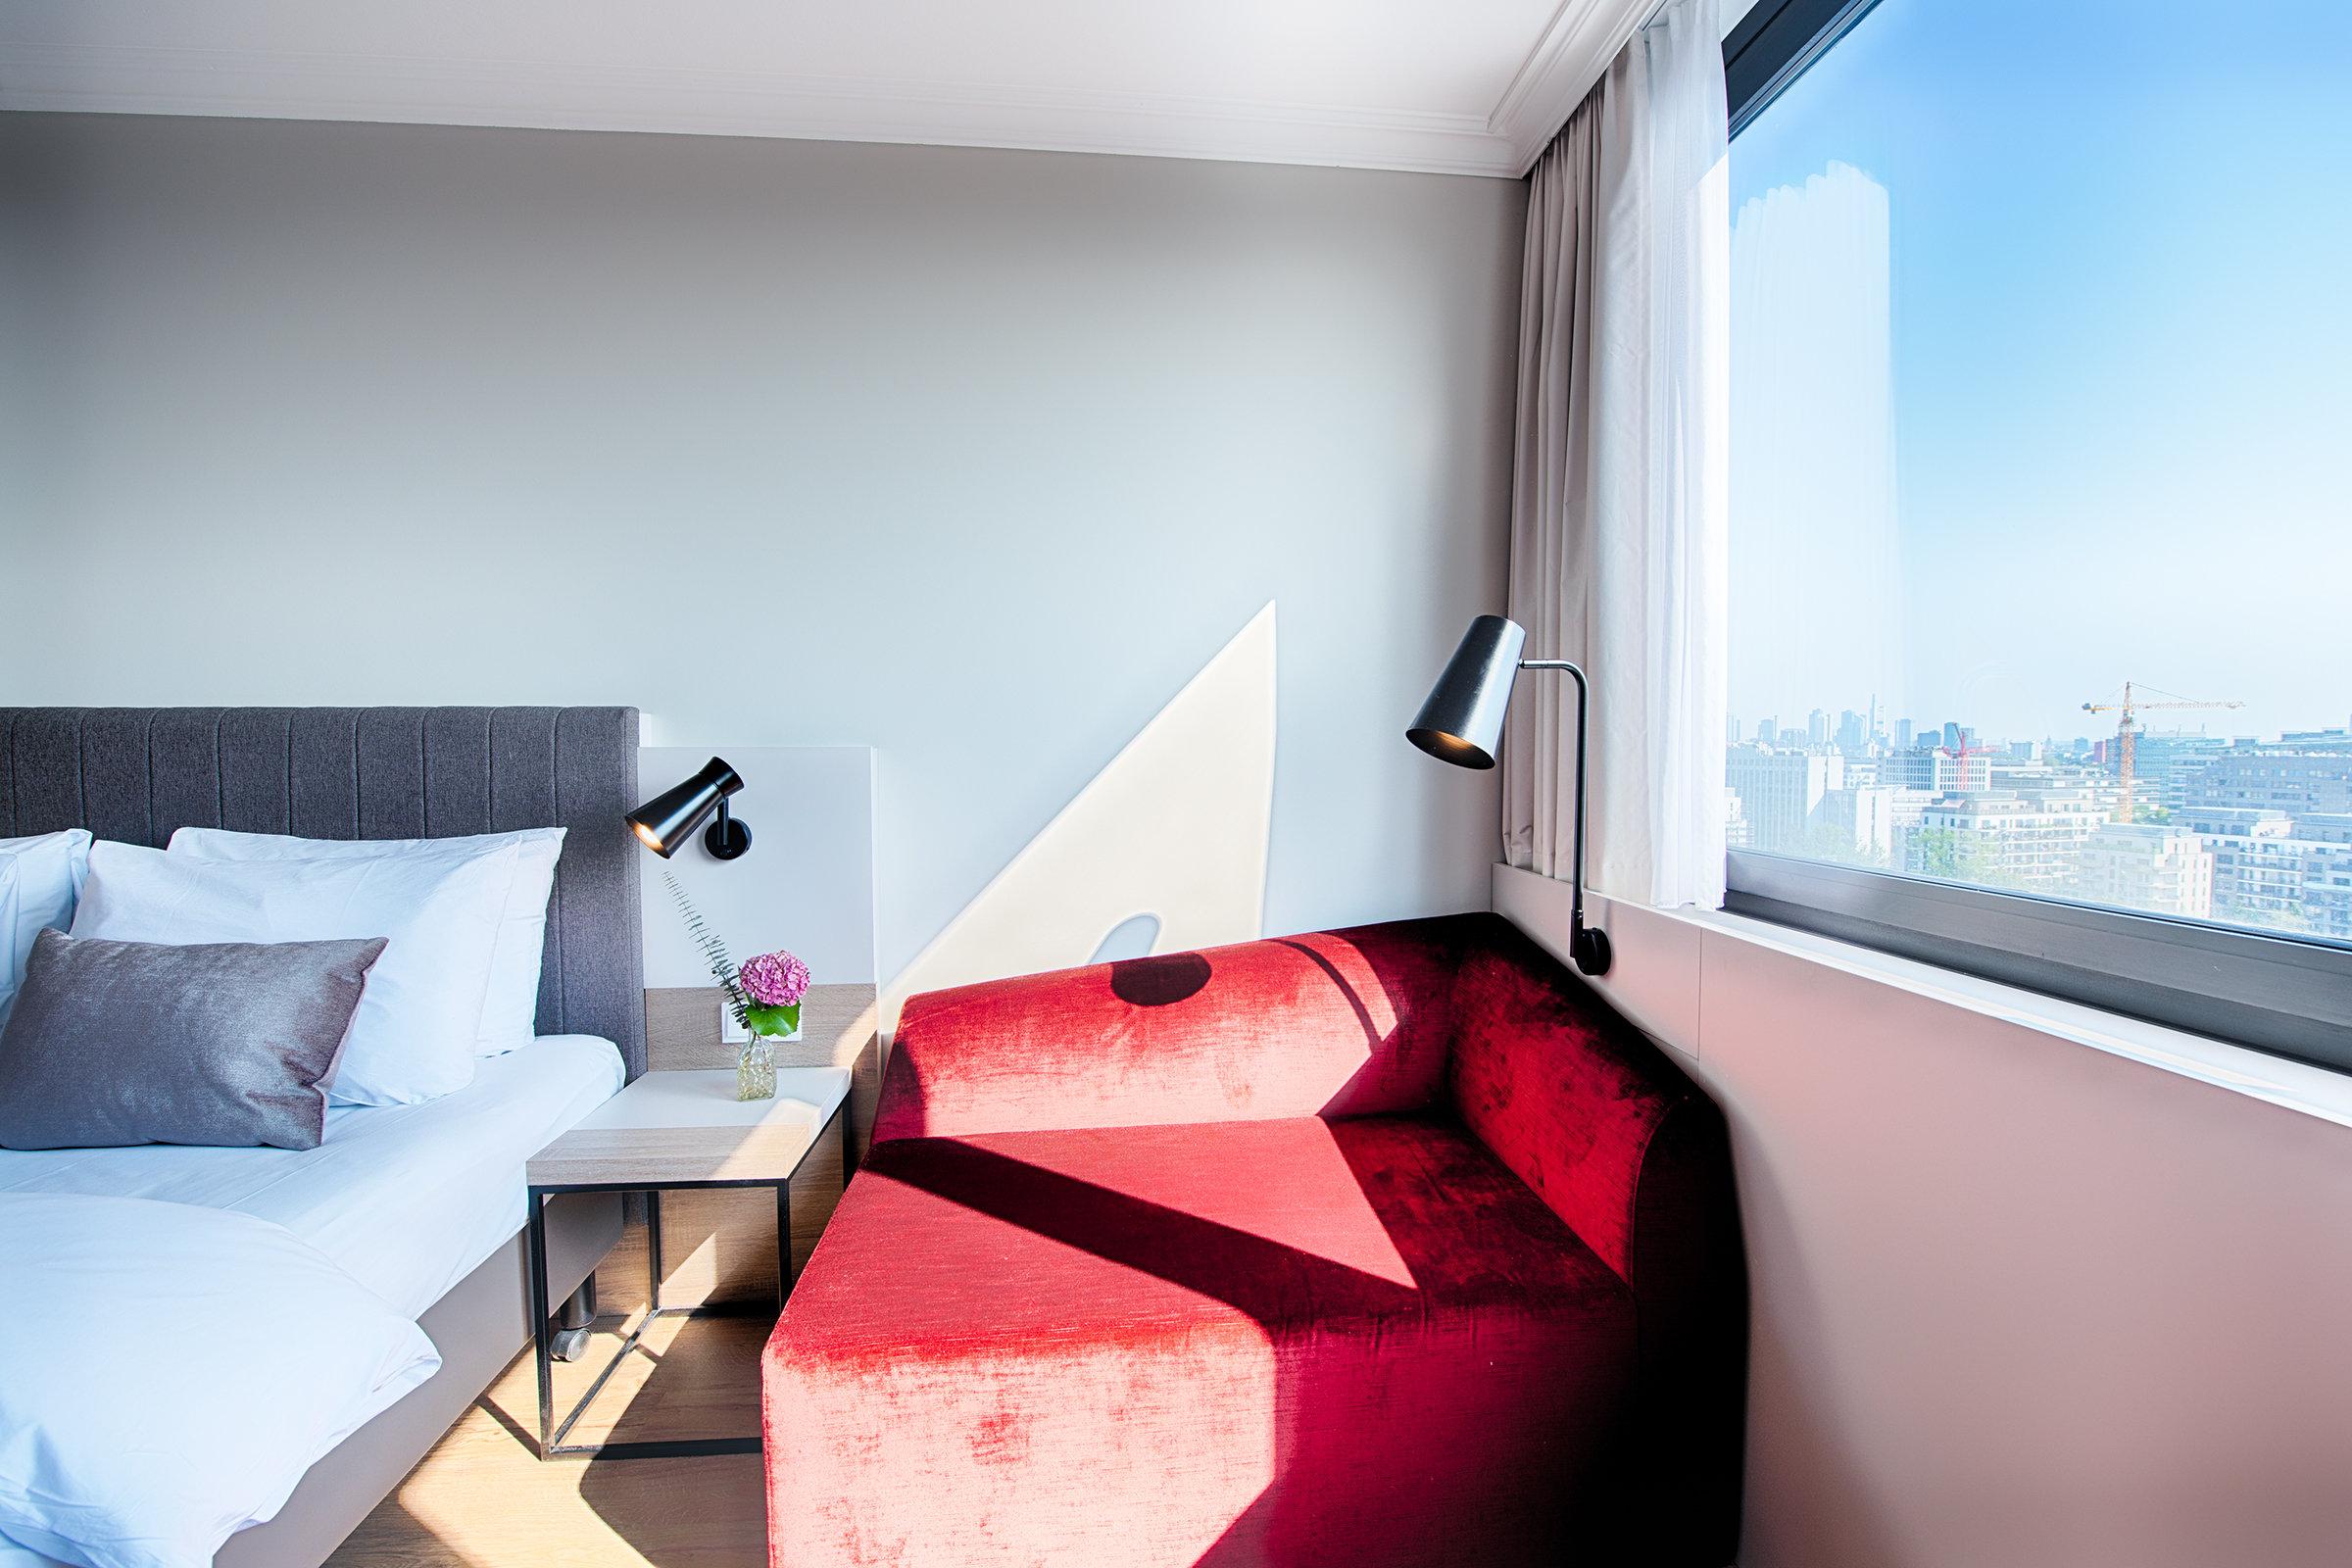 Enjoy the city view from our premium rooms on floors 8-13